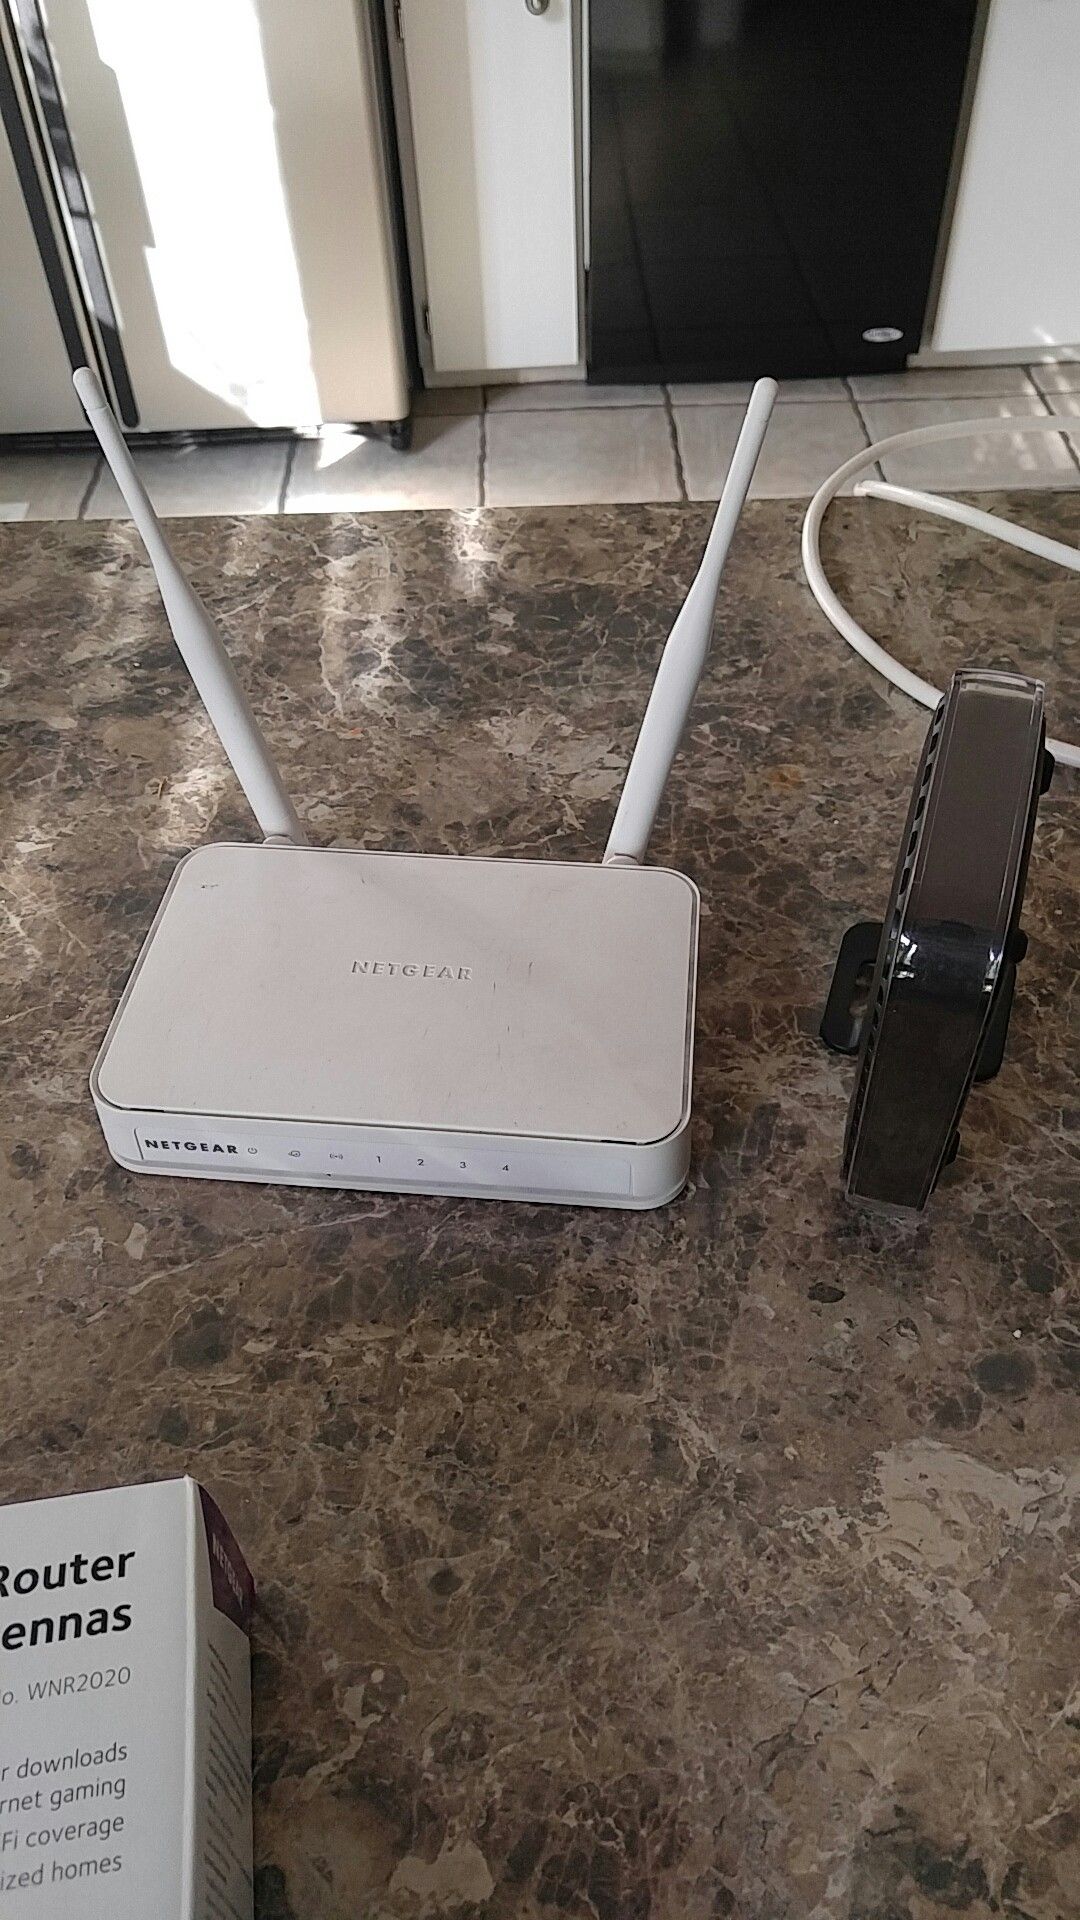 Modem and router for up to 300mbps internet via Xfinity and Time Warner.